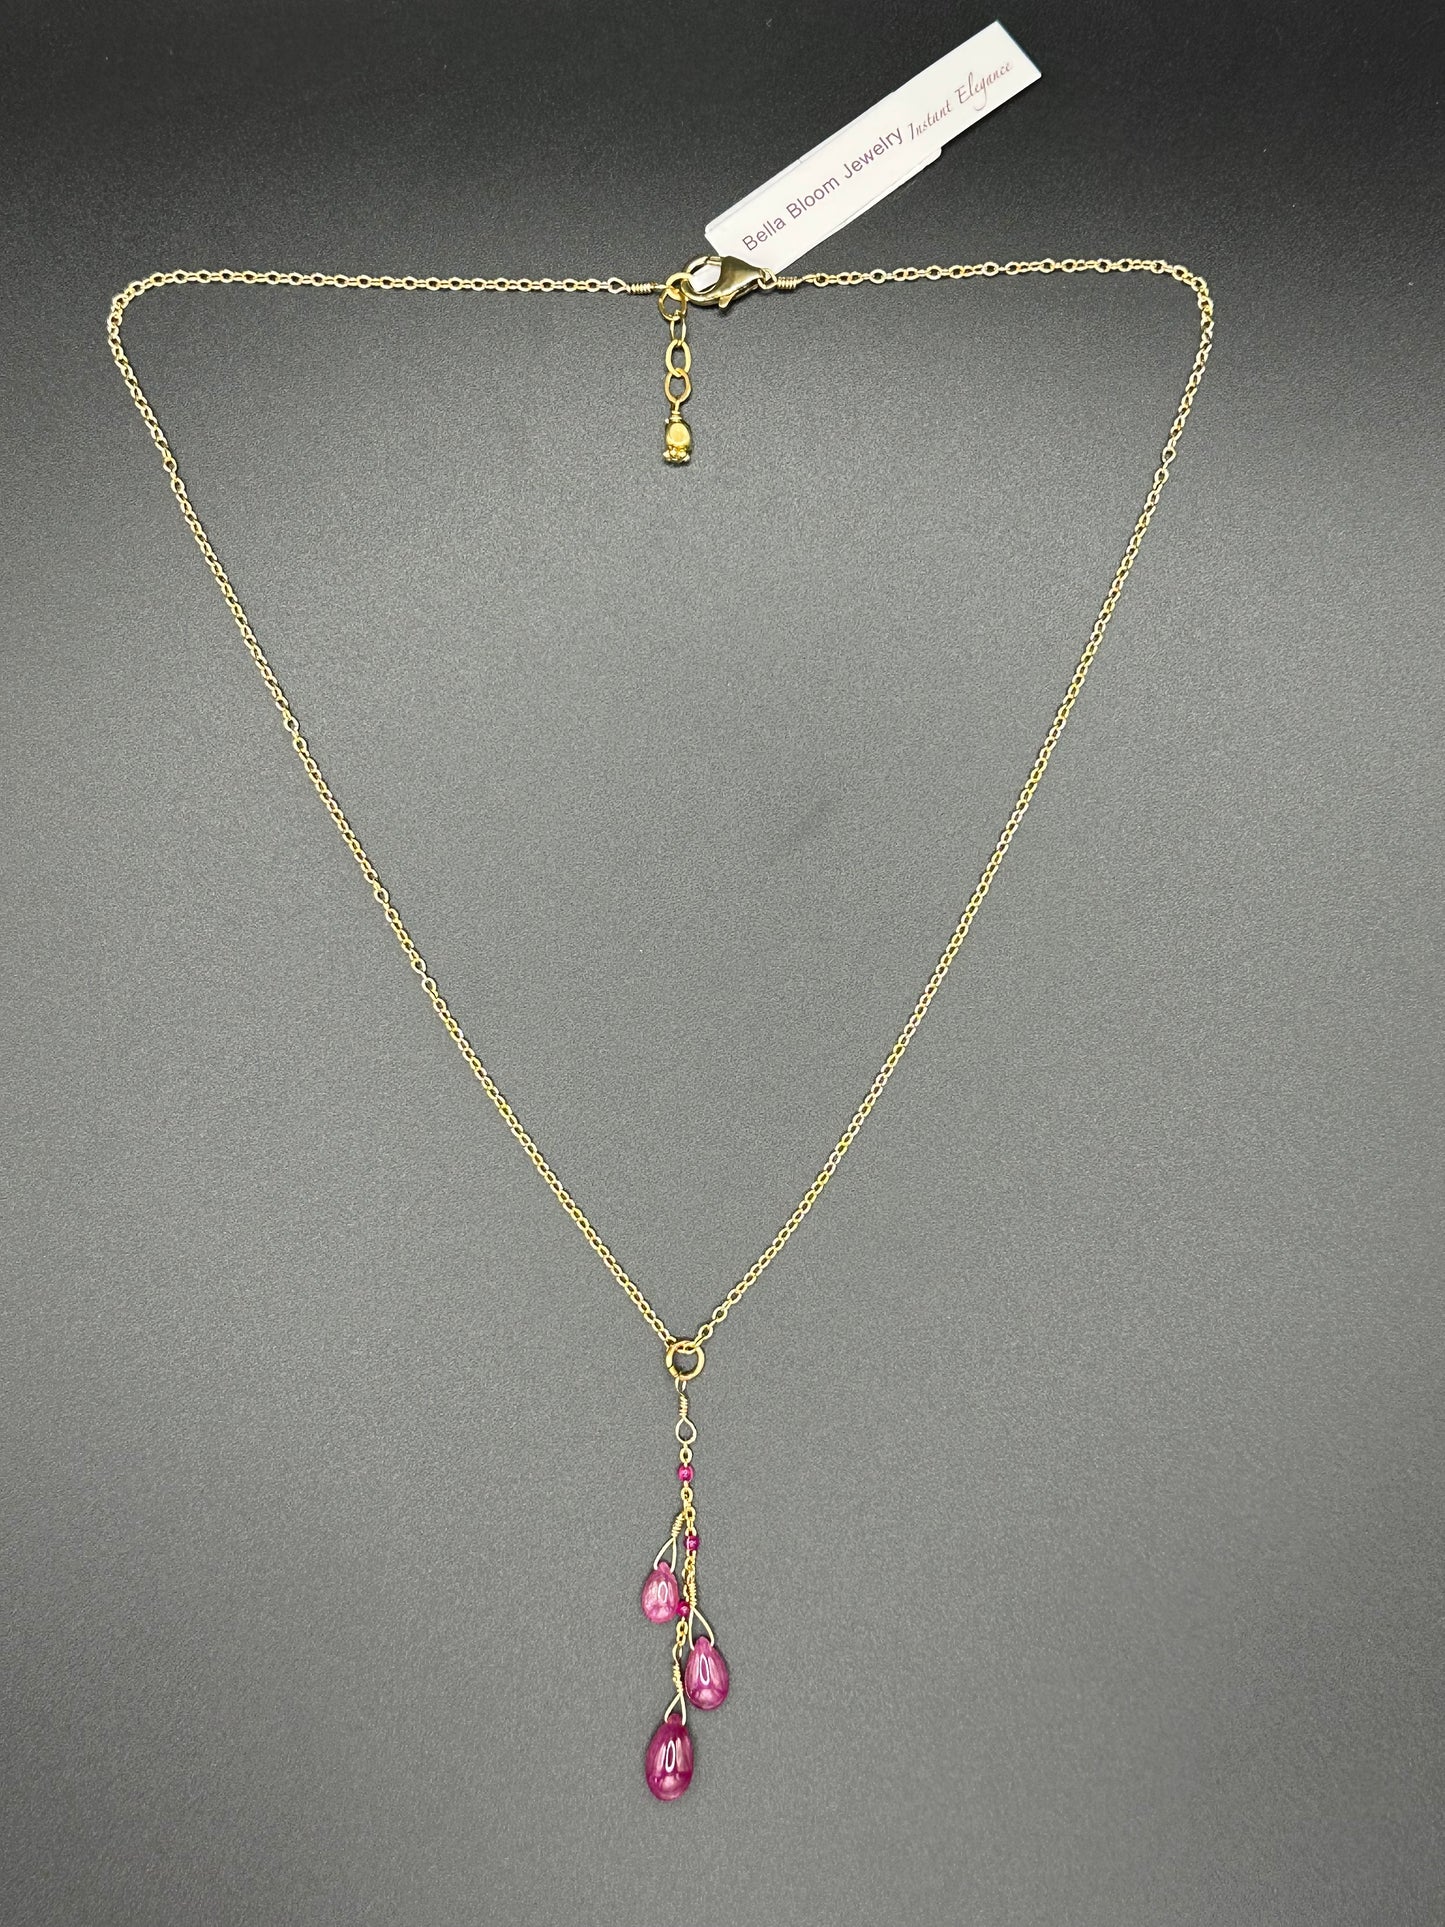 Bella Bloom Necklace - Rubies on 20" 14K Gold Fill Chain